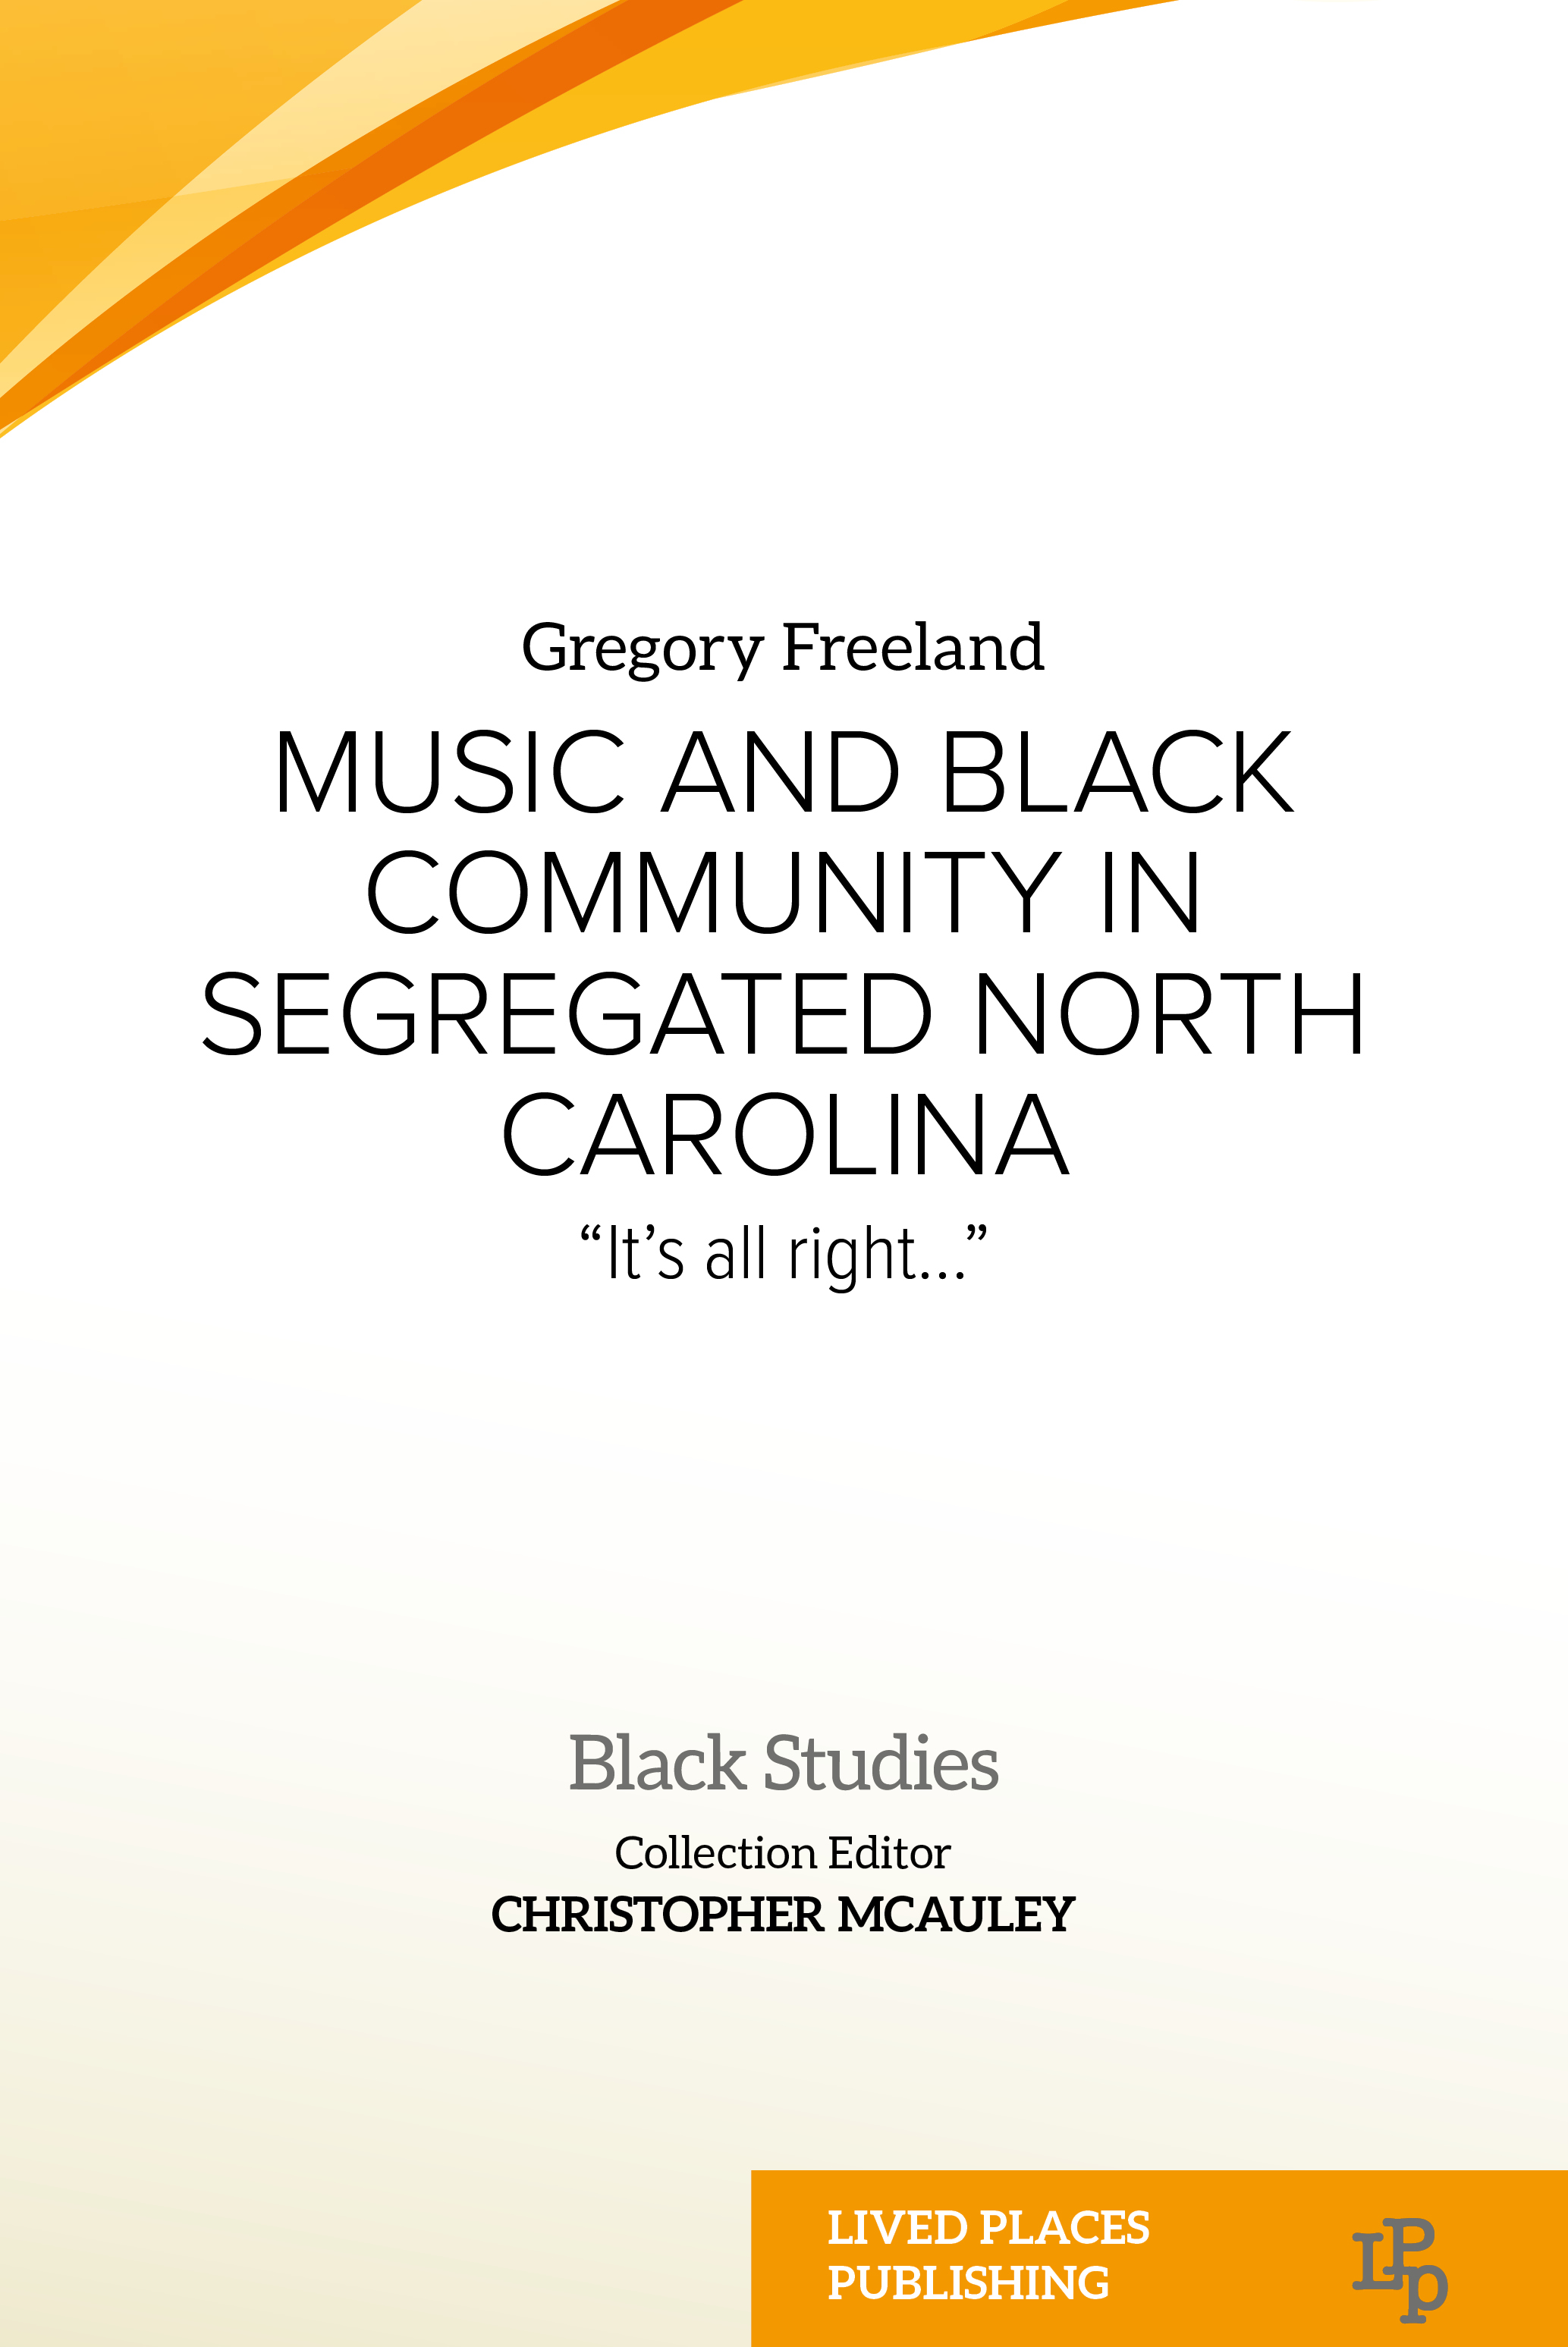 The front cover of Music and Black community in segregated North Carolina by Greg Freeland